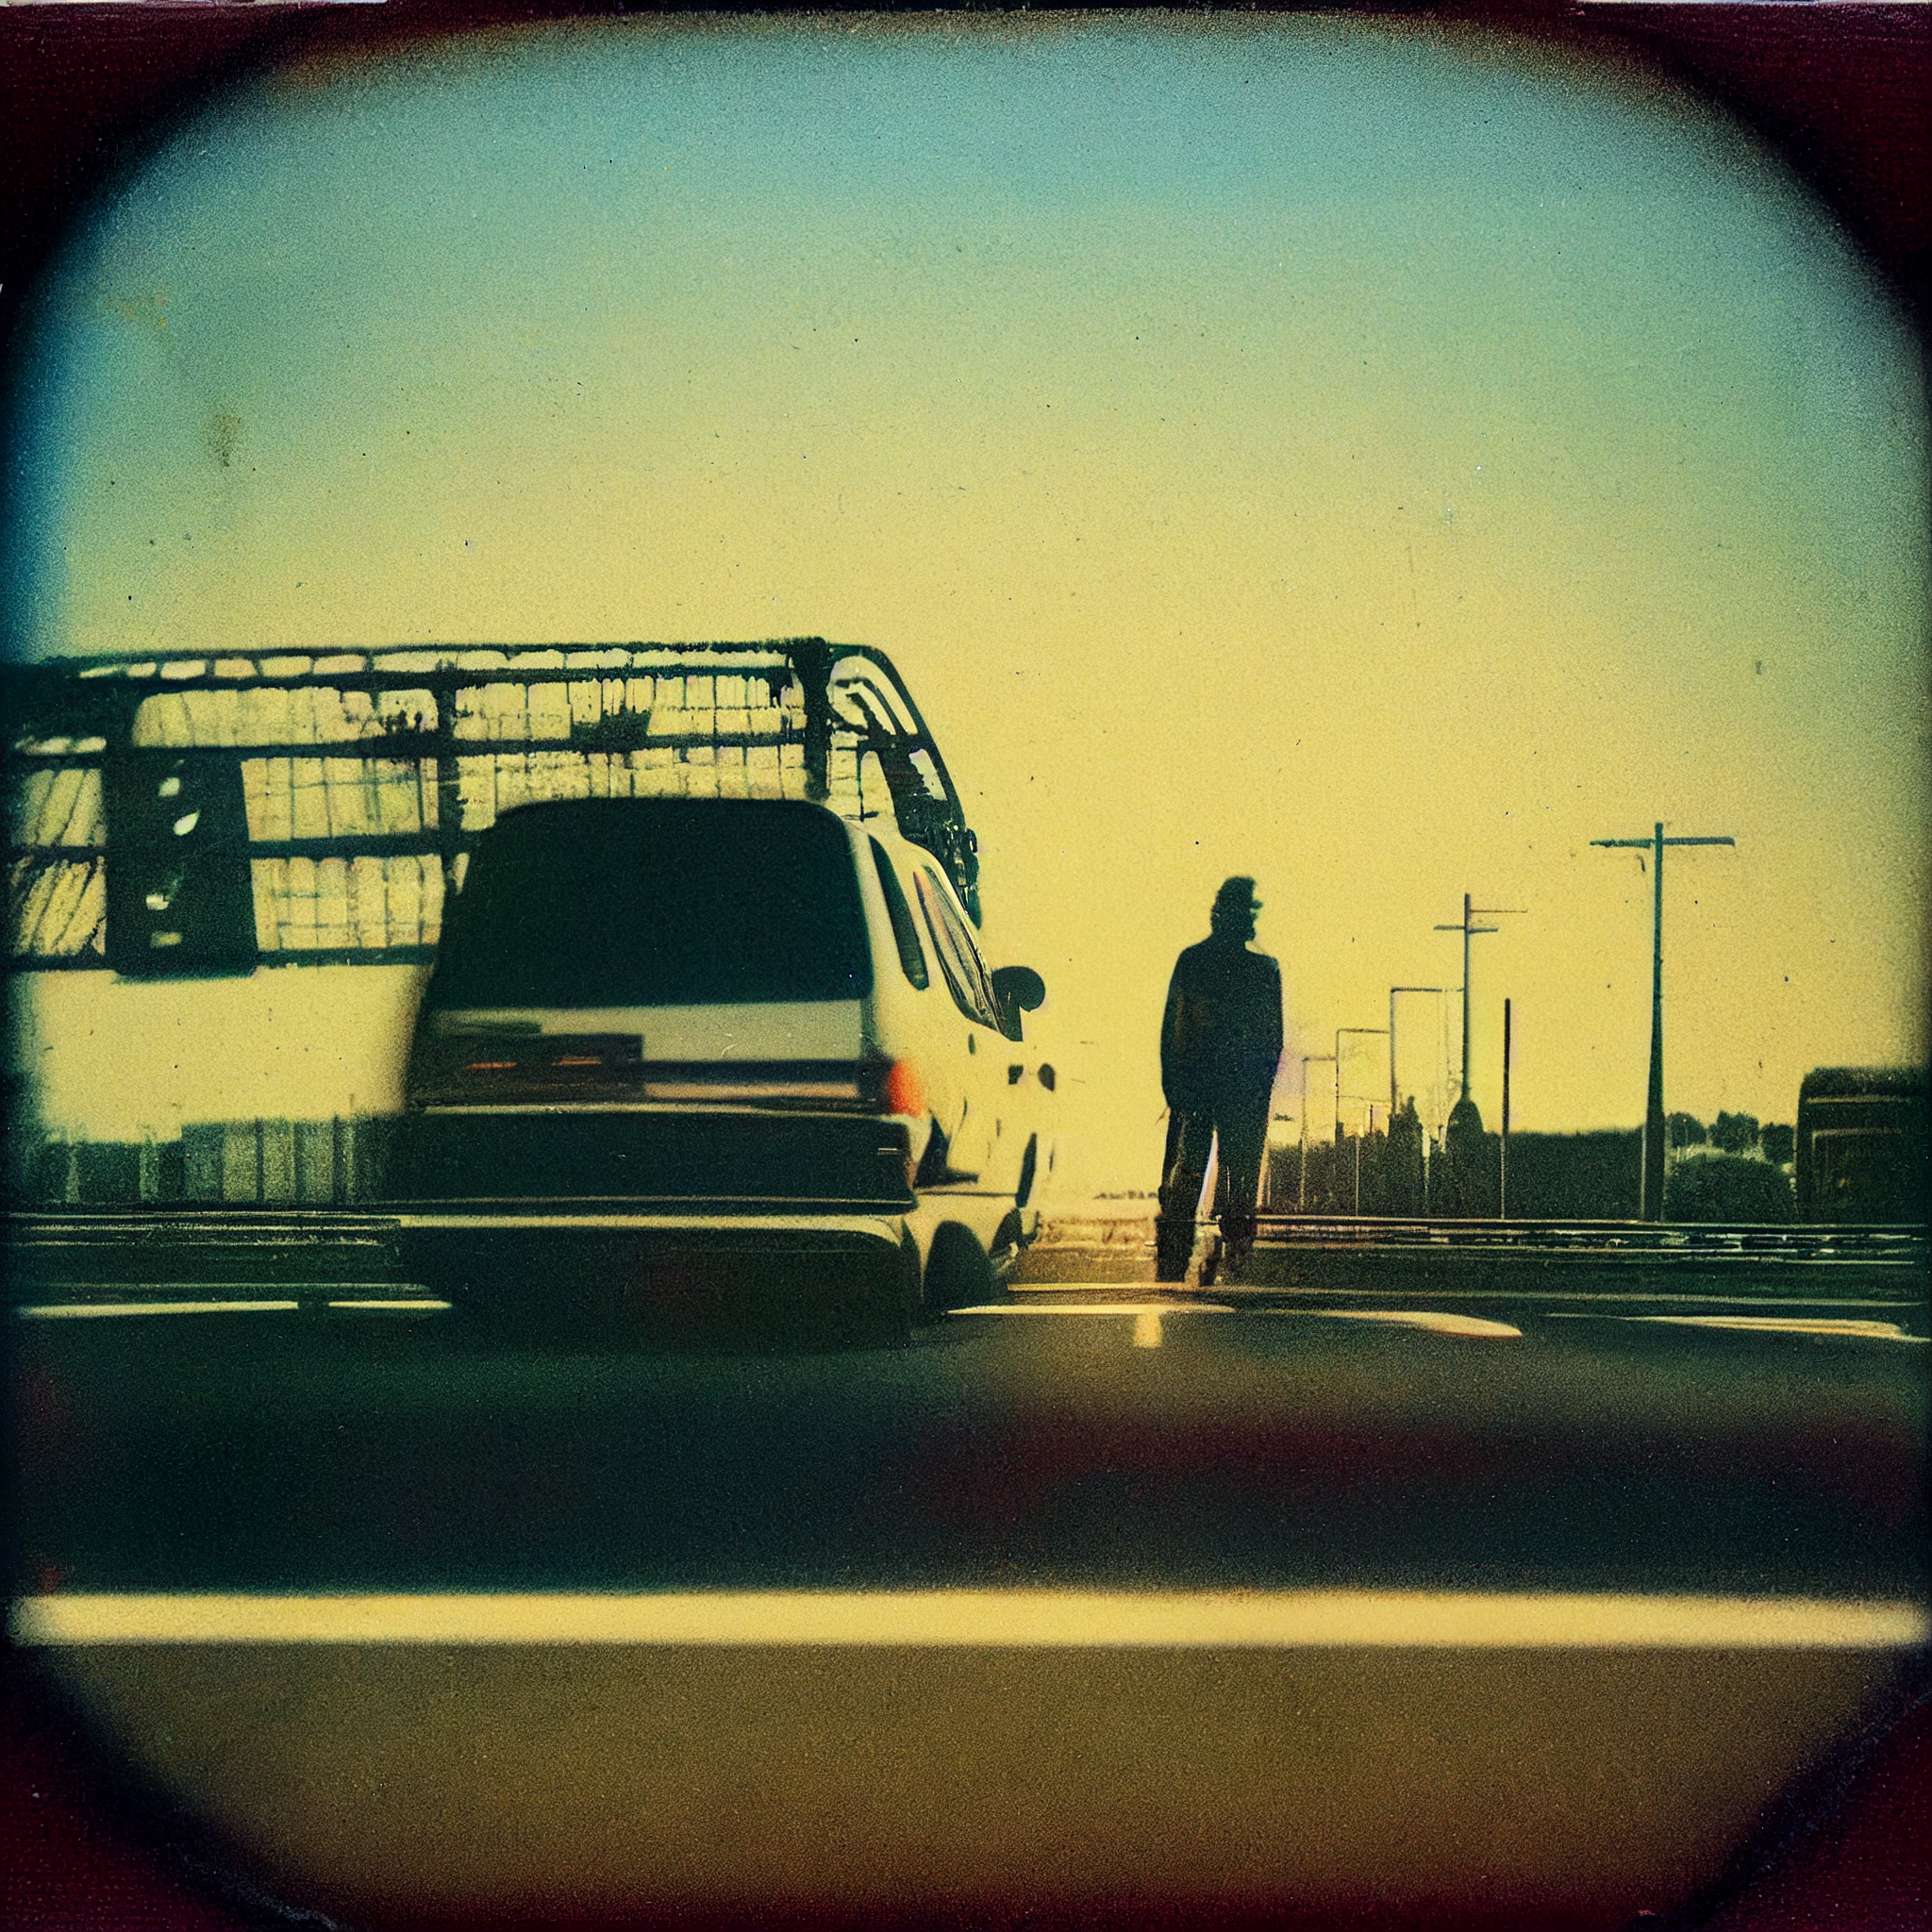 EricdeBroche_A_man_in_the_middle_of_the_motorway_with_cars_goin_386317d7-d98b-492c-8945-433d3ca9302e.png